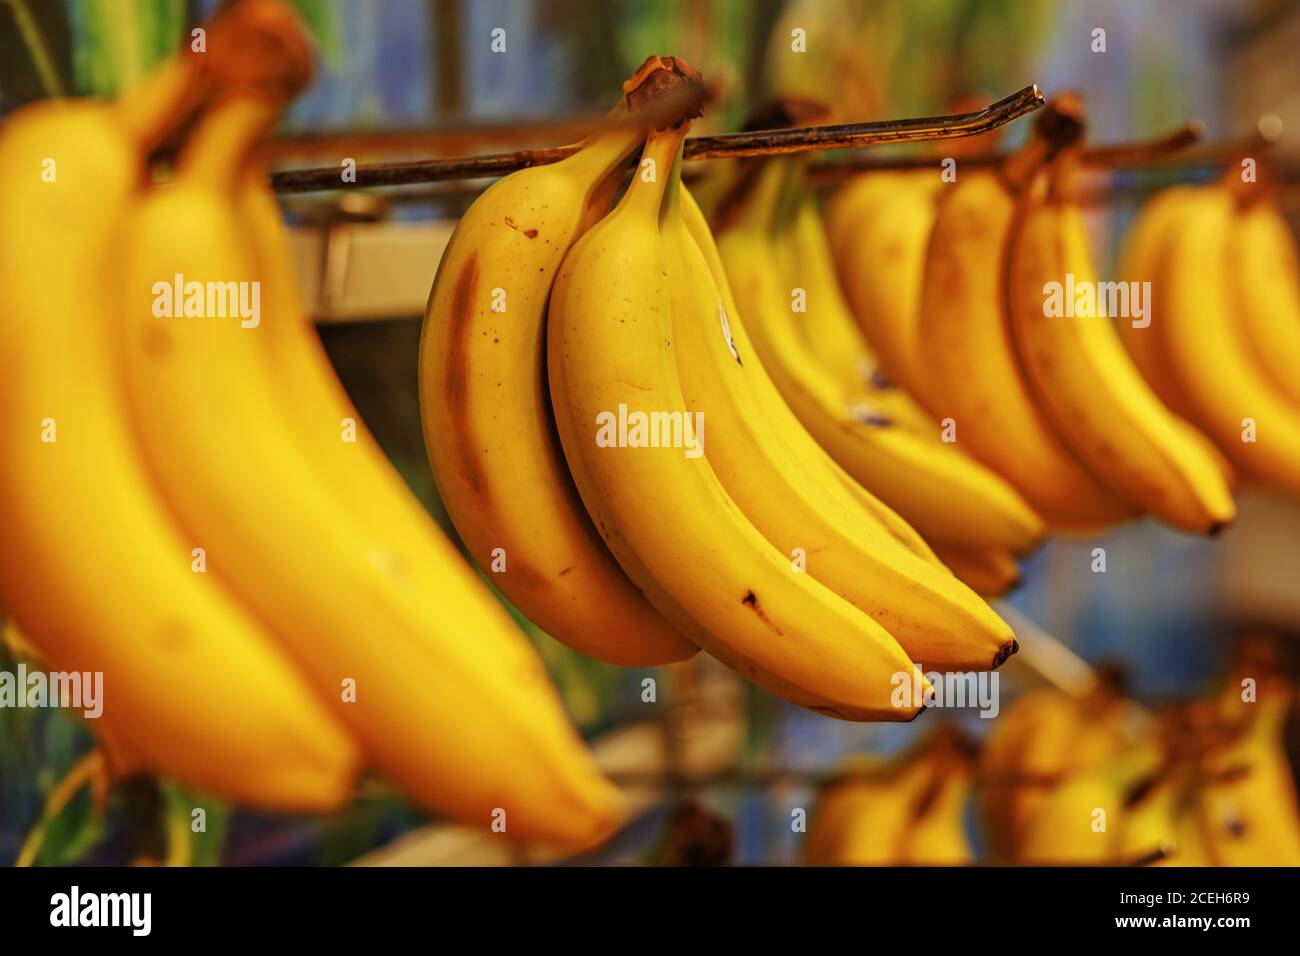 Rotten bananas sold in supermarkets in the Third World or economically underdeveloped countries Stock Photo